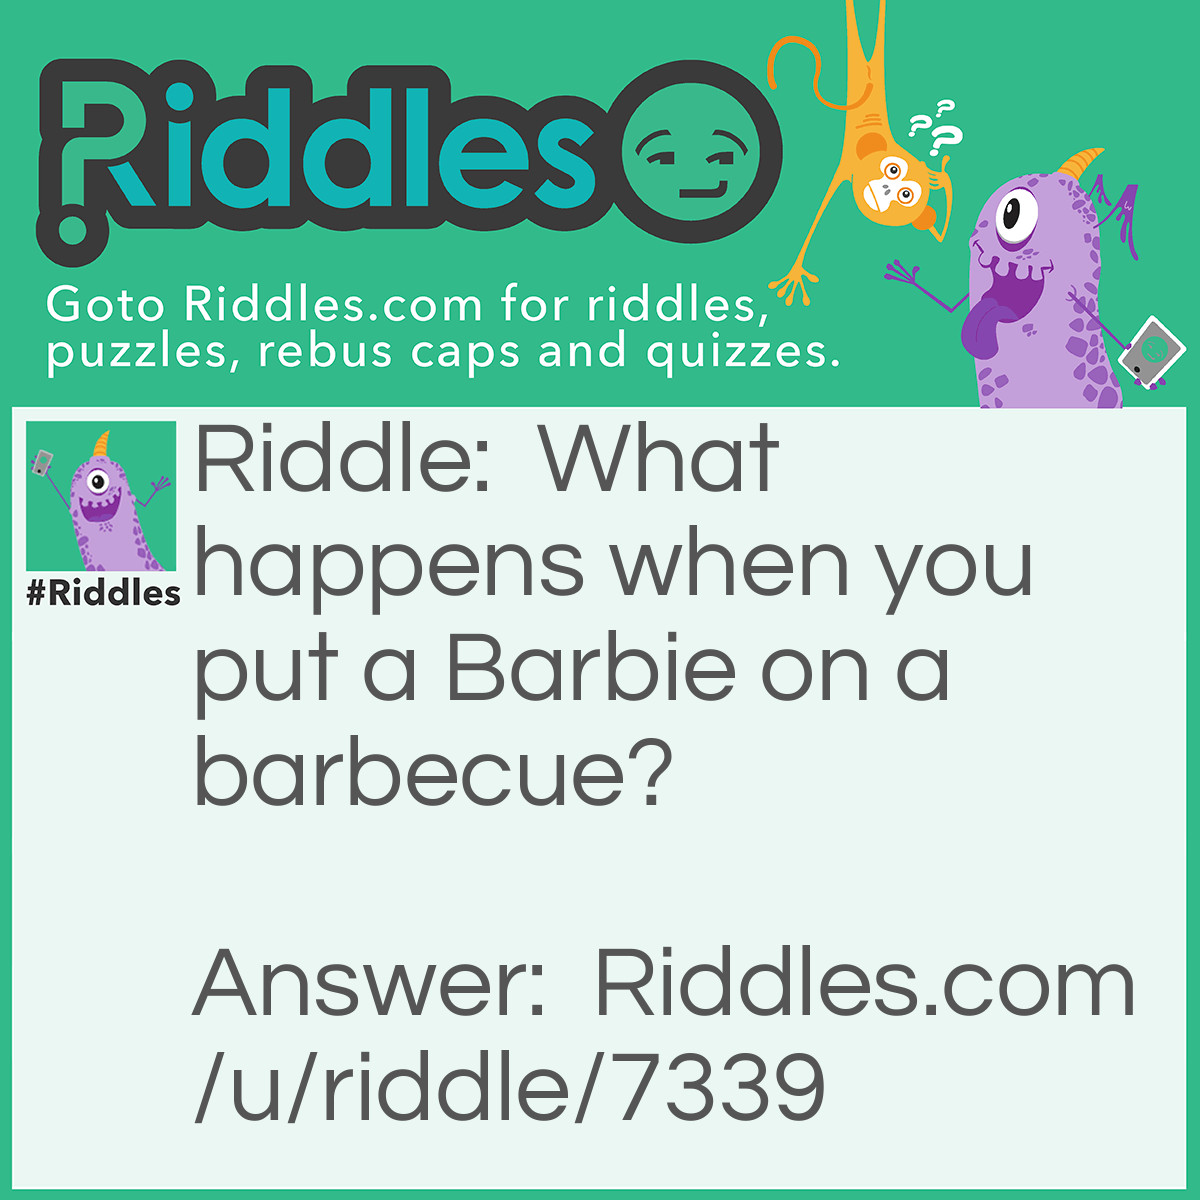 Riddle: What happens when you put a Barbie on a barbecue? Answer: "Barbiecue"